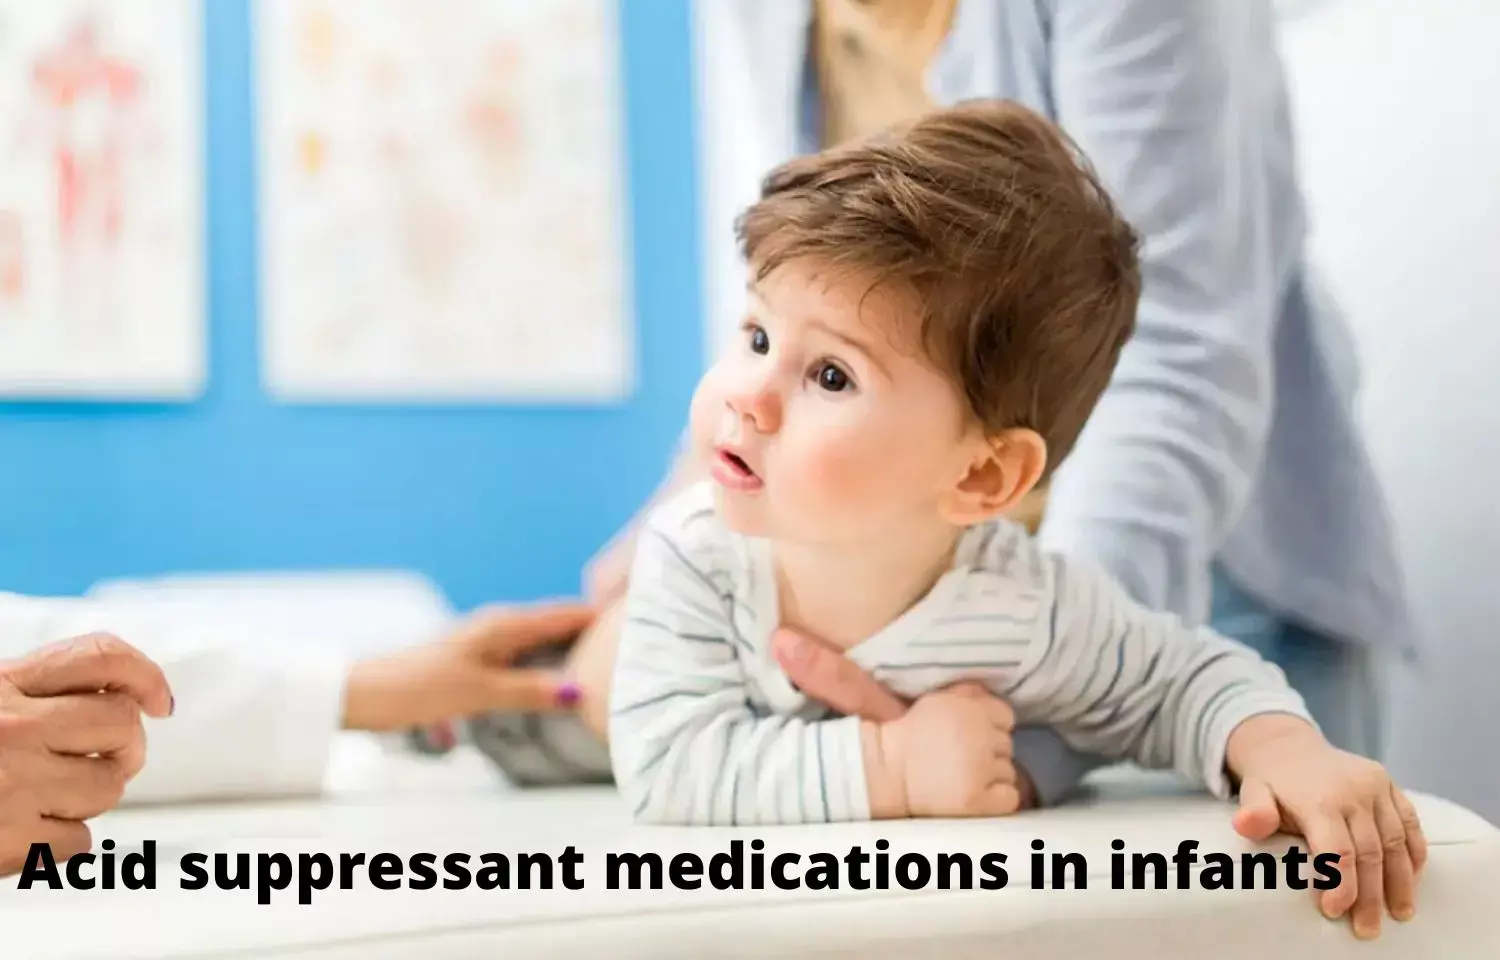 Acid-suppressants use during infancy increases childhood risk of recurrent wheeze and asthma